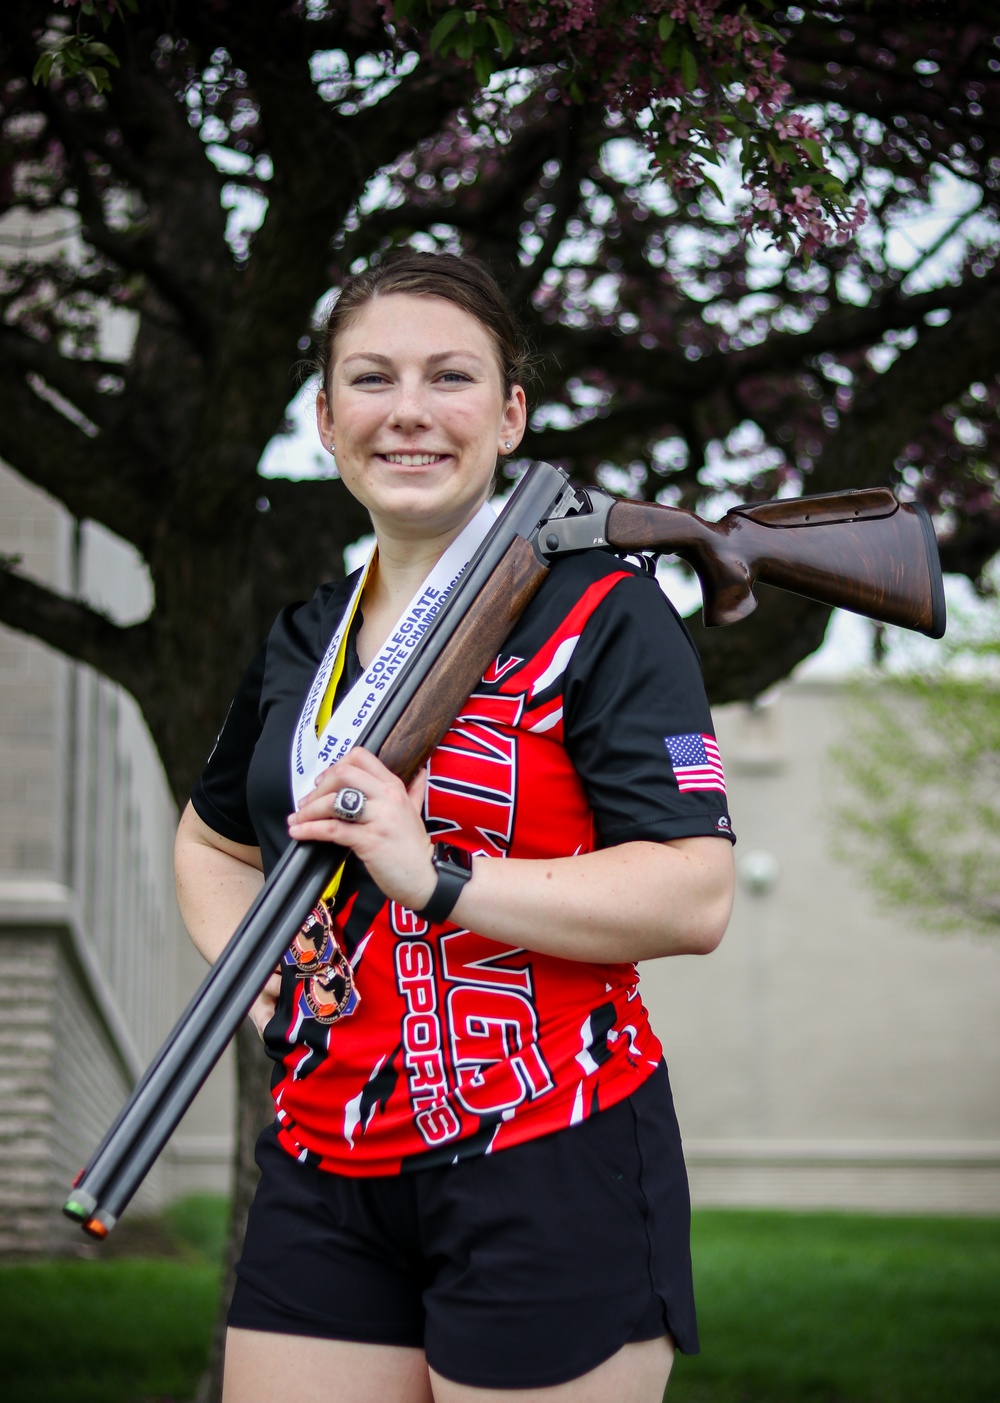 Iowa Soldier is 2022 Women’s American Trap National Champion